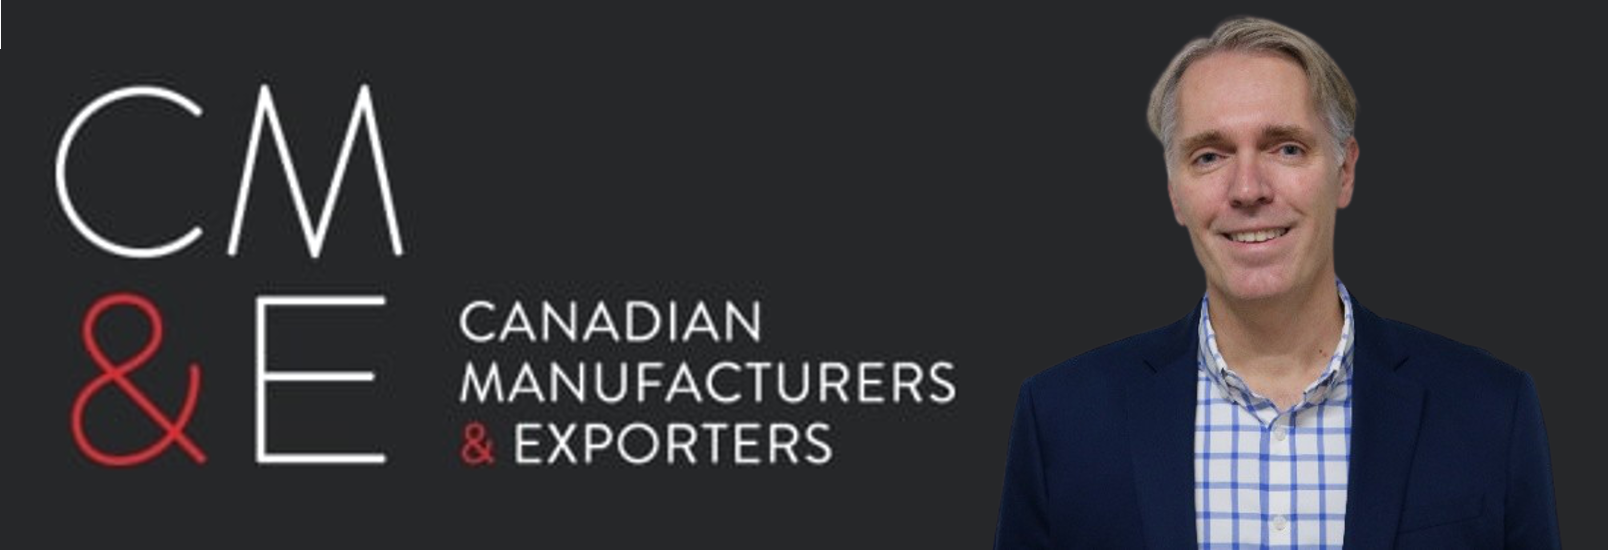 Mike Tidy to Present on Industry 4.0 at Canadian Manufacturers and Exporters Virtual Event